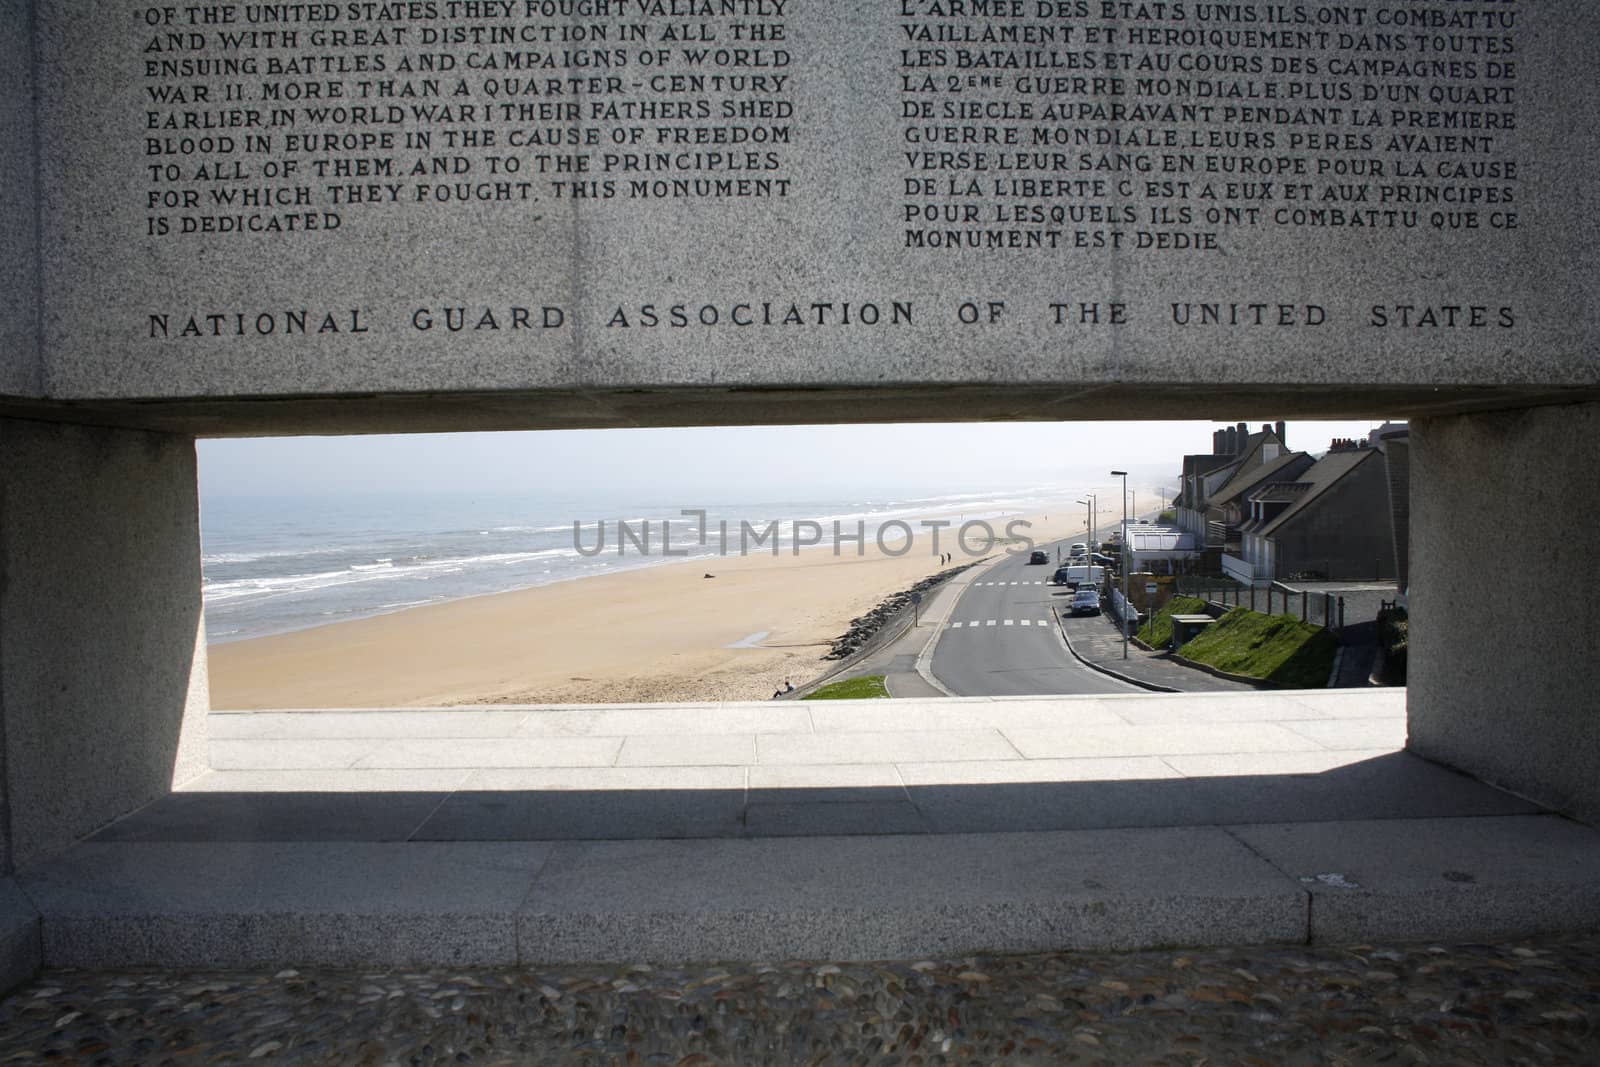 Omaha Beach viewed through the US Army National Guard Memorial at Vierville-sur-Mer, Normandy, France.